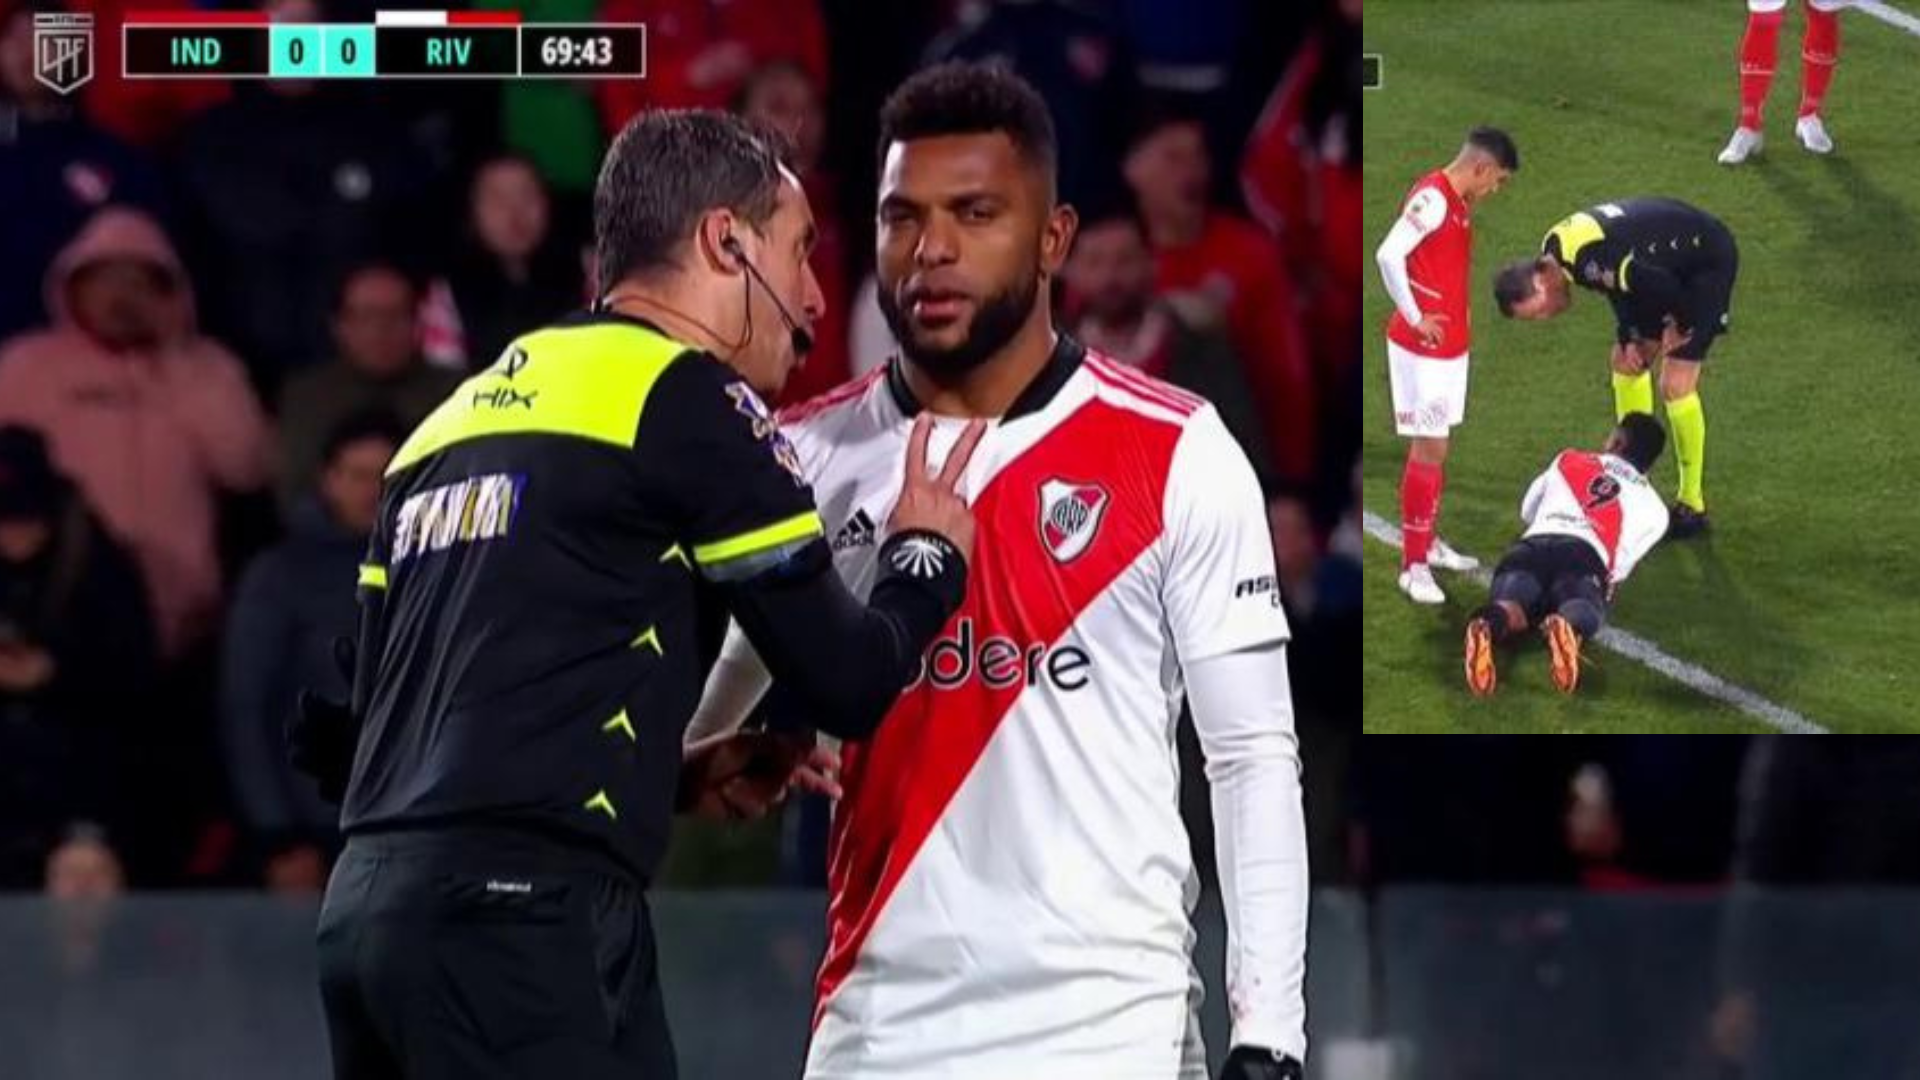 The Colombian Miguel Ángel Borja was attacked in the area vs.  Independent, but the central referee decided not to sanction a penalty, nor to expel the aggressor.  Image: ESPN.